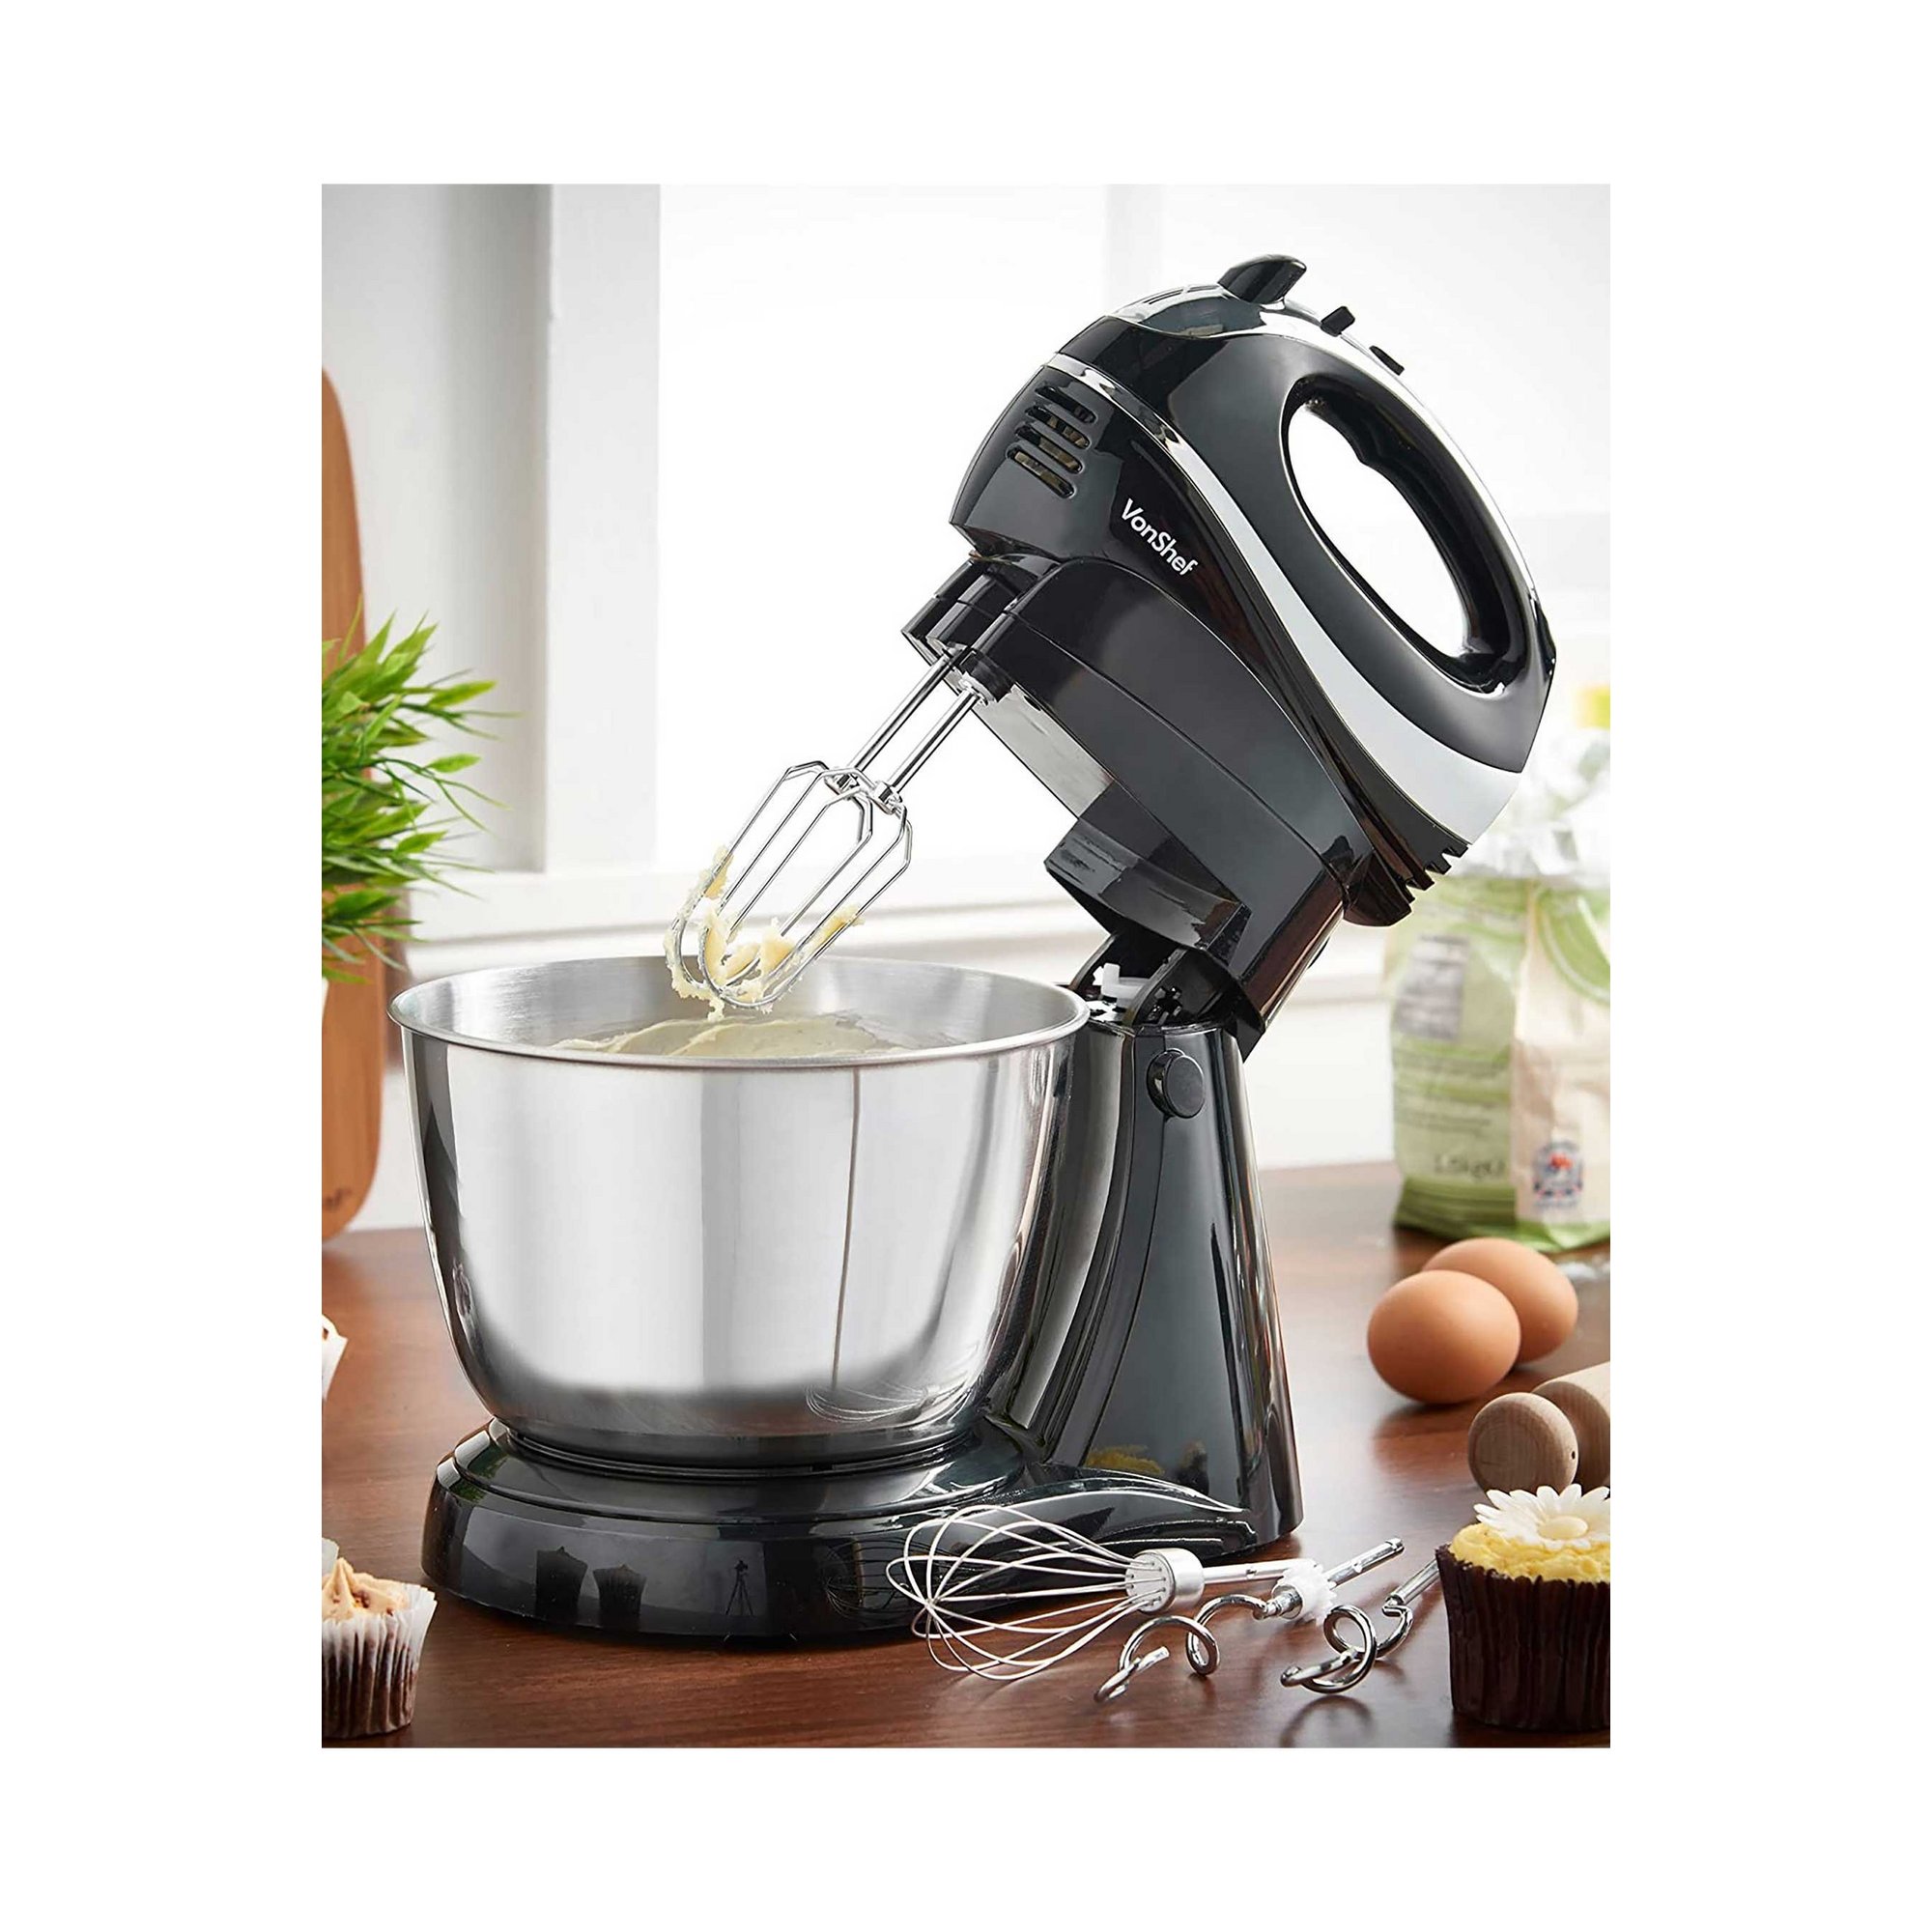 VonShef 3.5L Hand Stand Mixer With Whisk